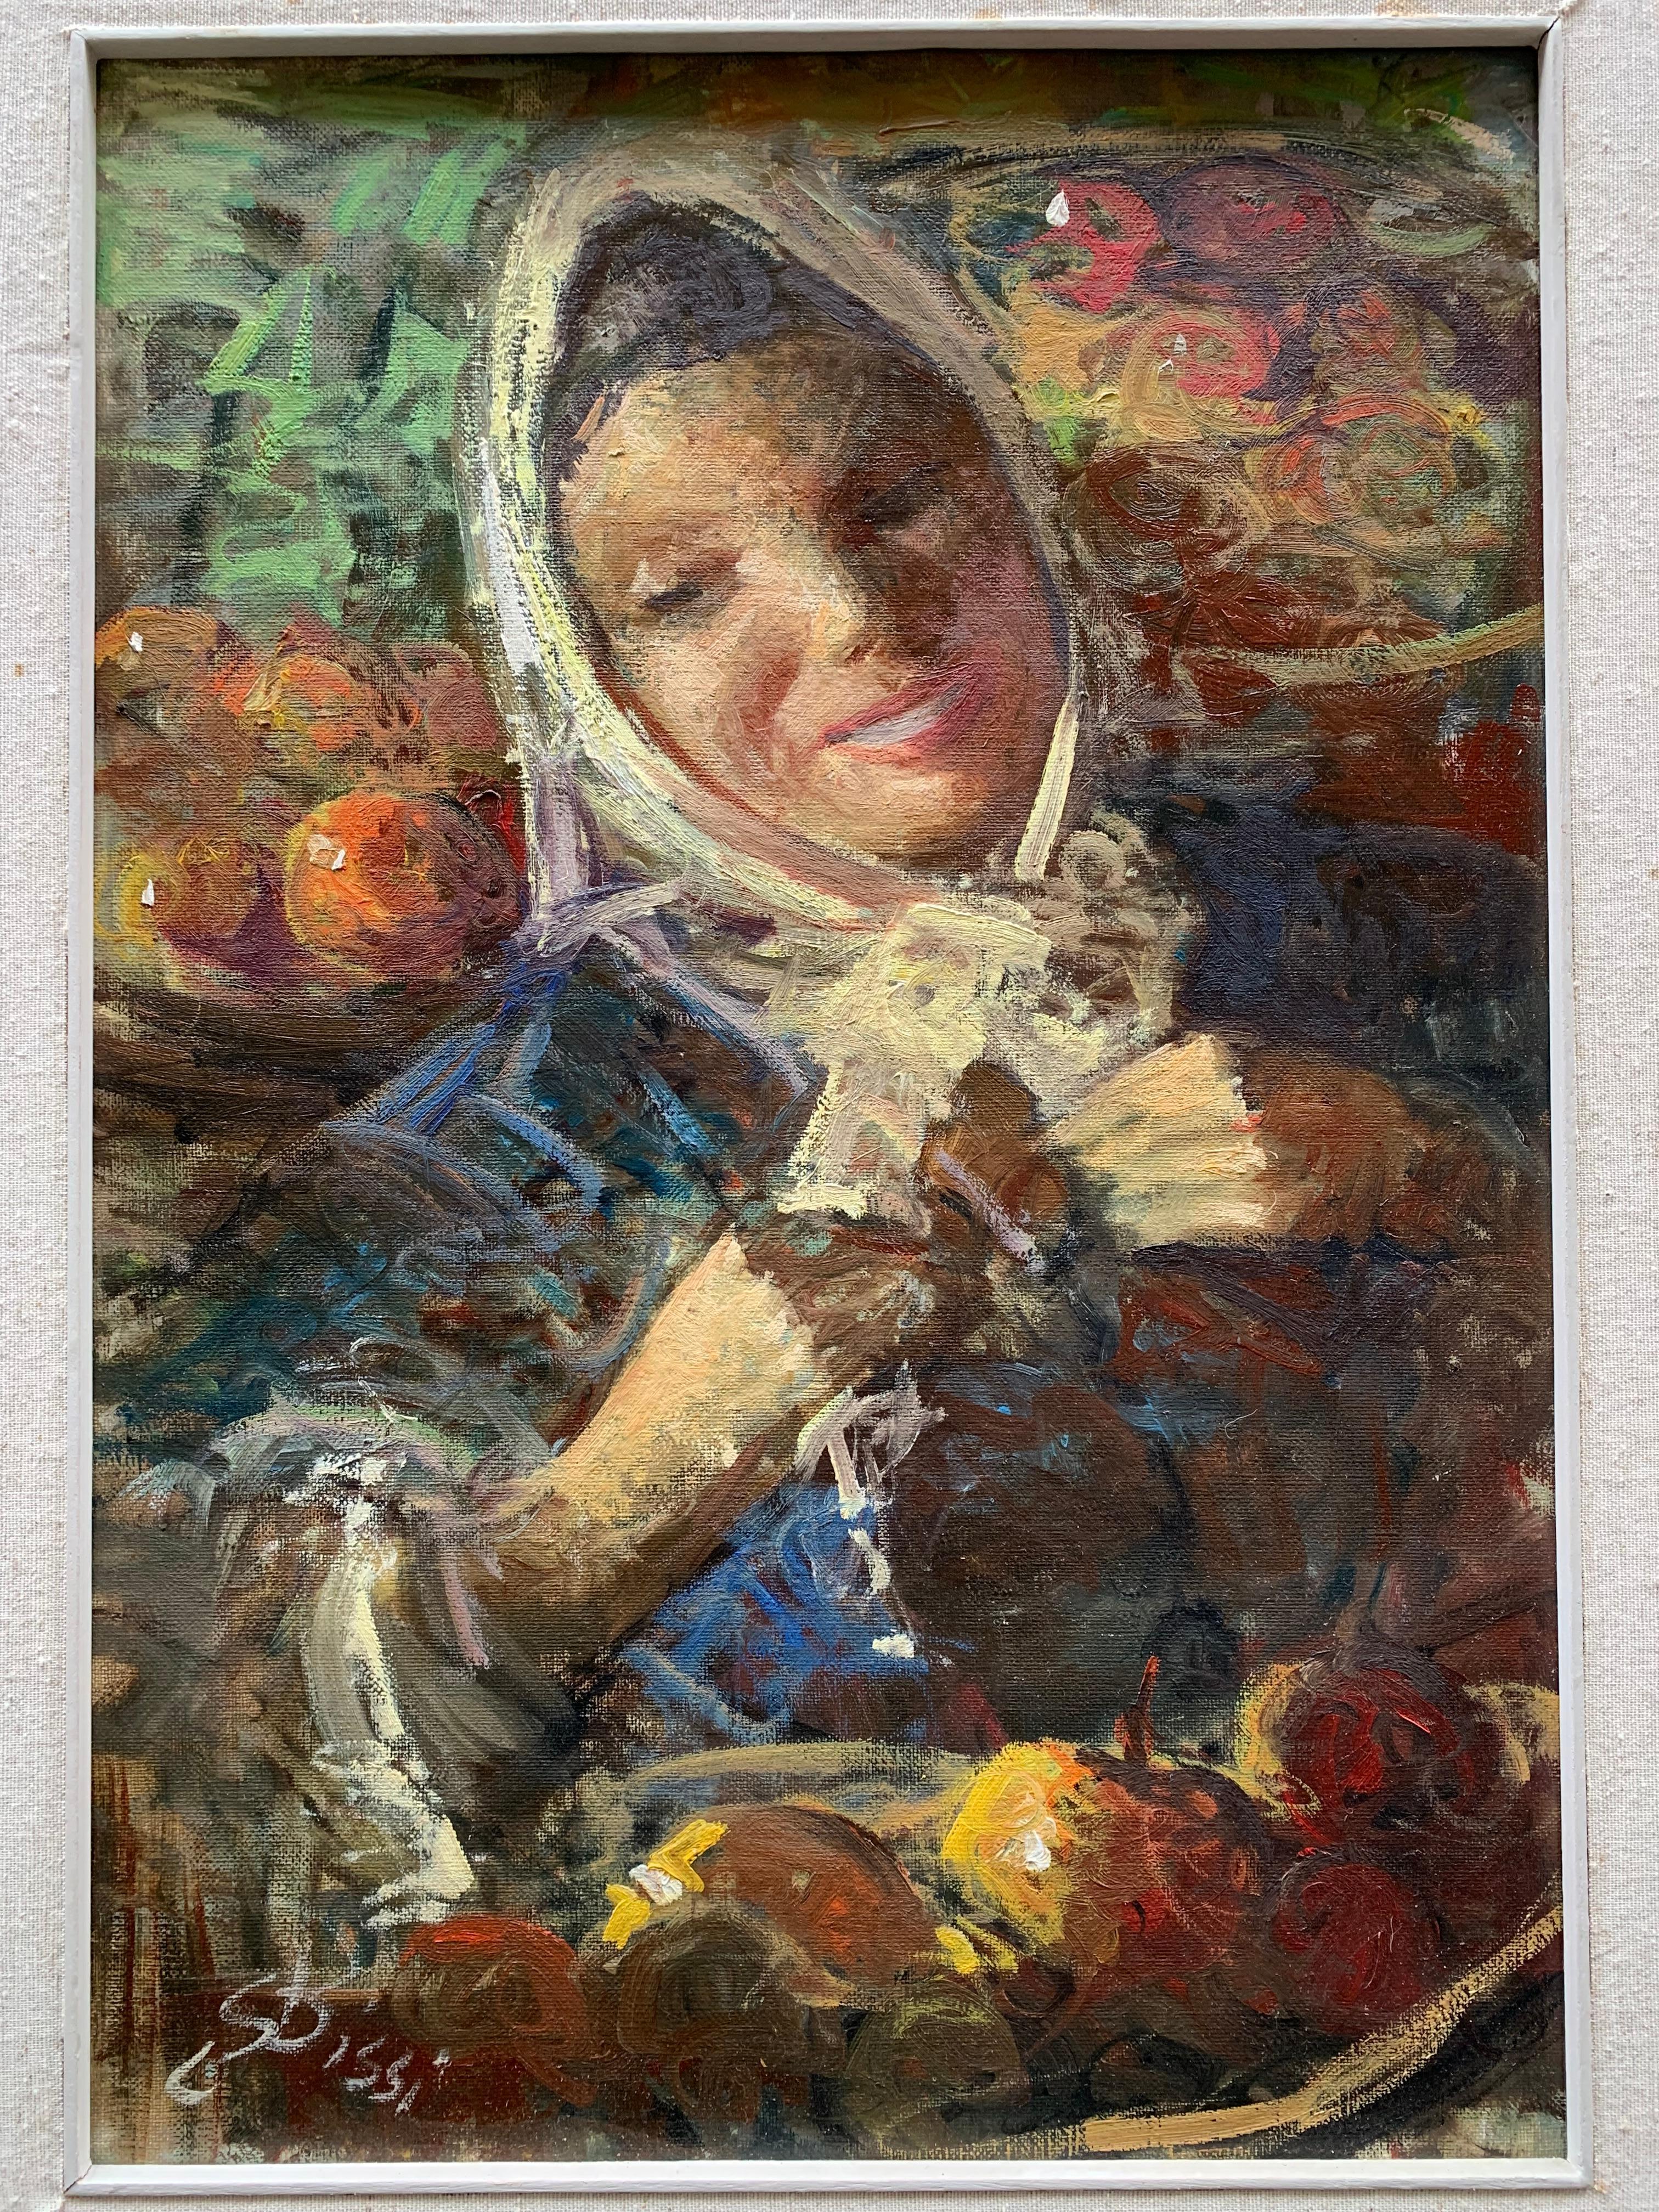 Figurative Painting Sergio Cirni Bissi - Girl with fruit Le marché. Année 1958. Signé Sergio Cirno Bissi (1902 - 1987) 